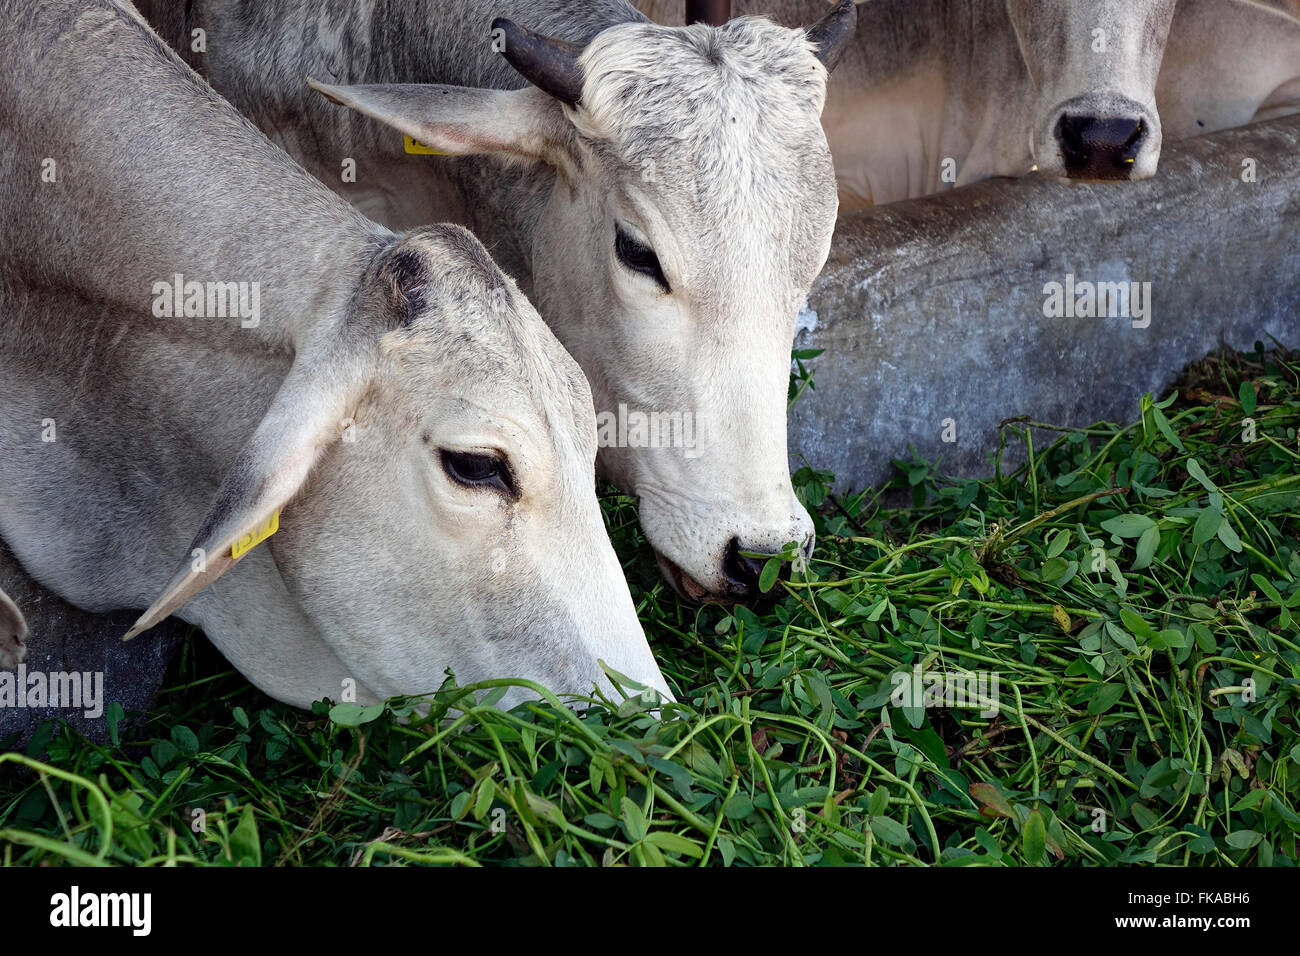 Cows eating fodder in their shed at the National Dairy Research Institute (NDRI), Karnal, Haryana, India Stock Photo